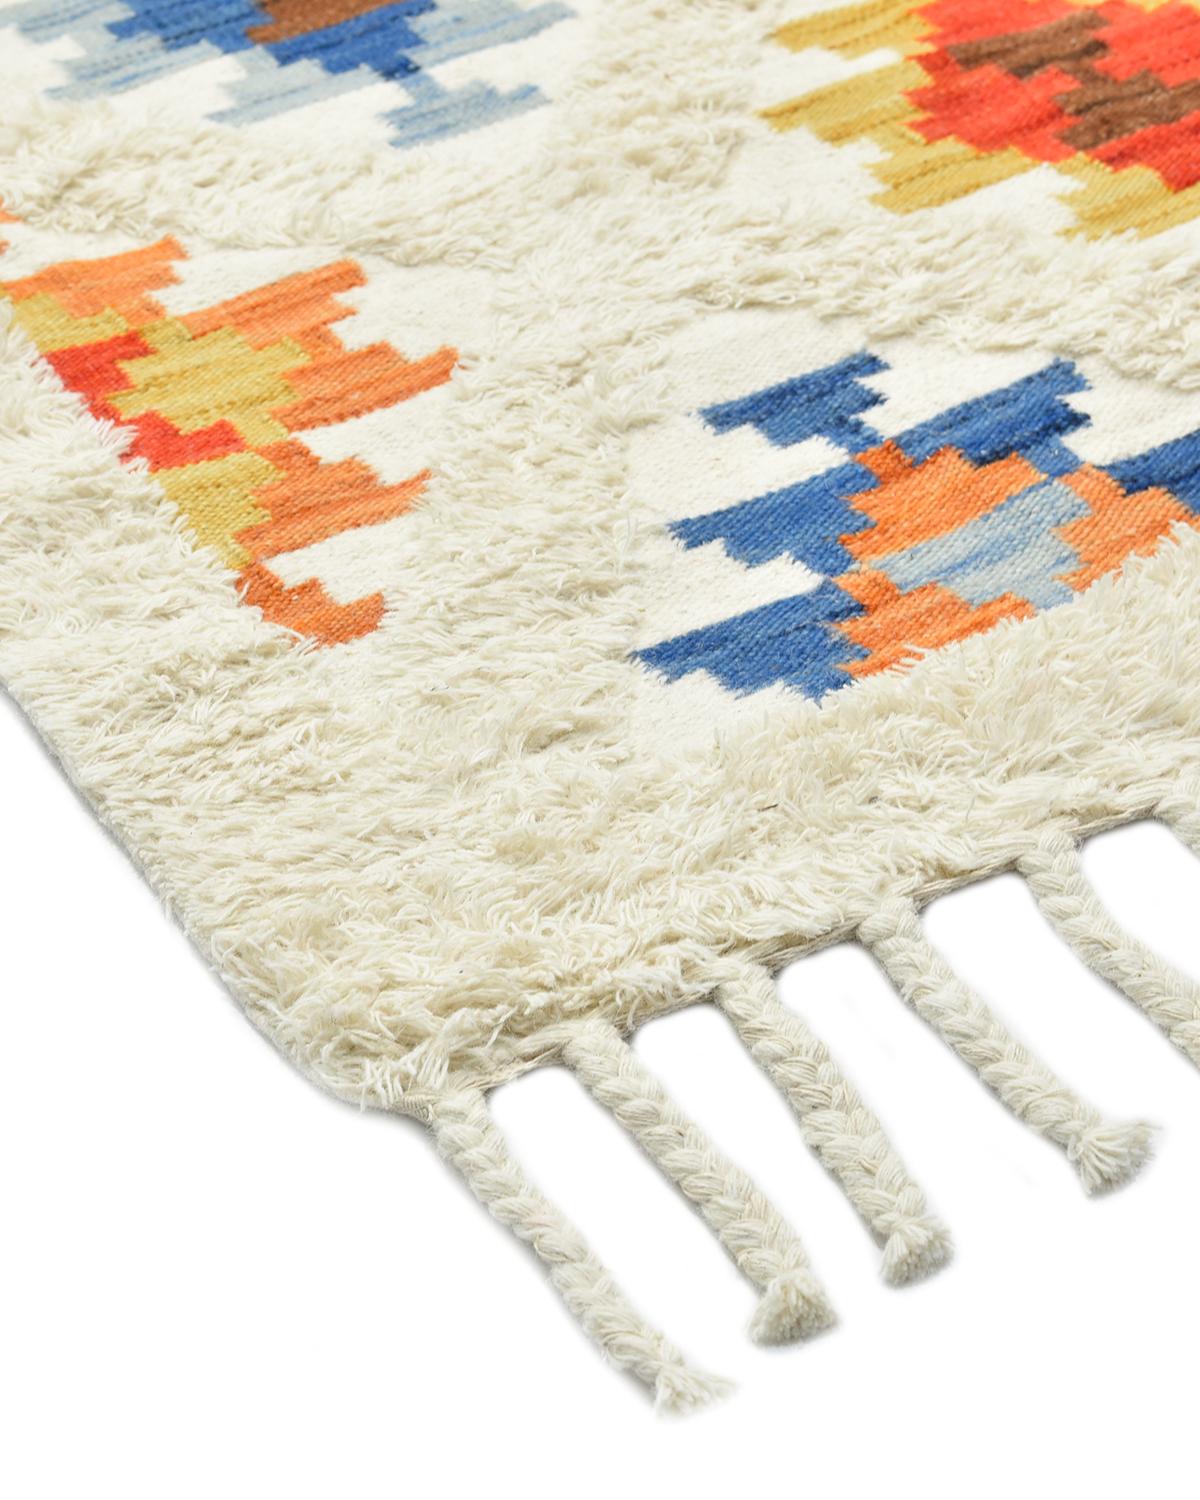 Moroccan rugs such as Beni Ourains and boucherouites are highly prized for their plush pile that makes walking barefoot a delight. hand knotted of sumptuous wool with designs inspired by centuries-old Tribal motifs, the Shaggy Moroccan collection